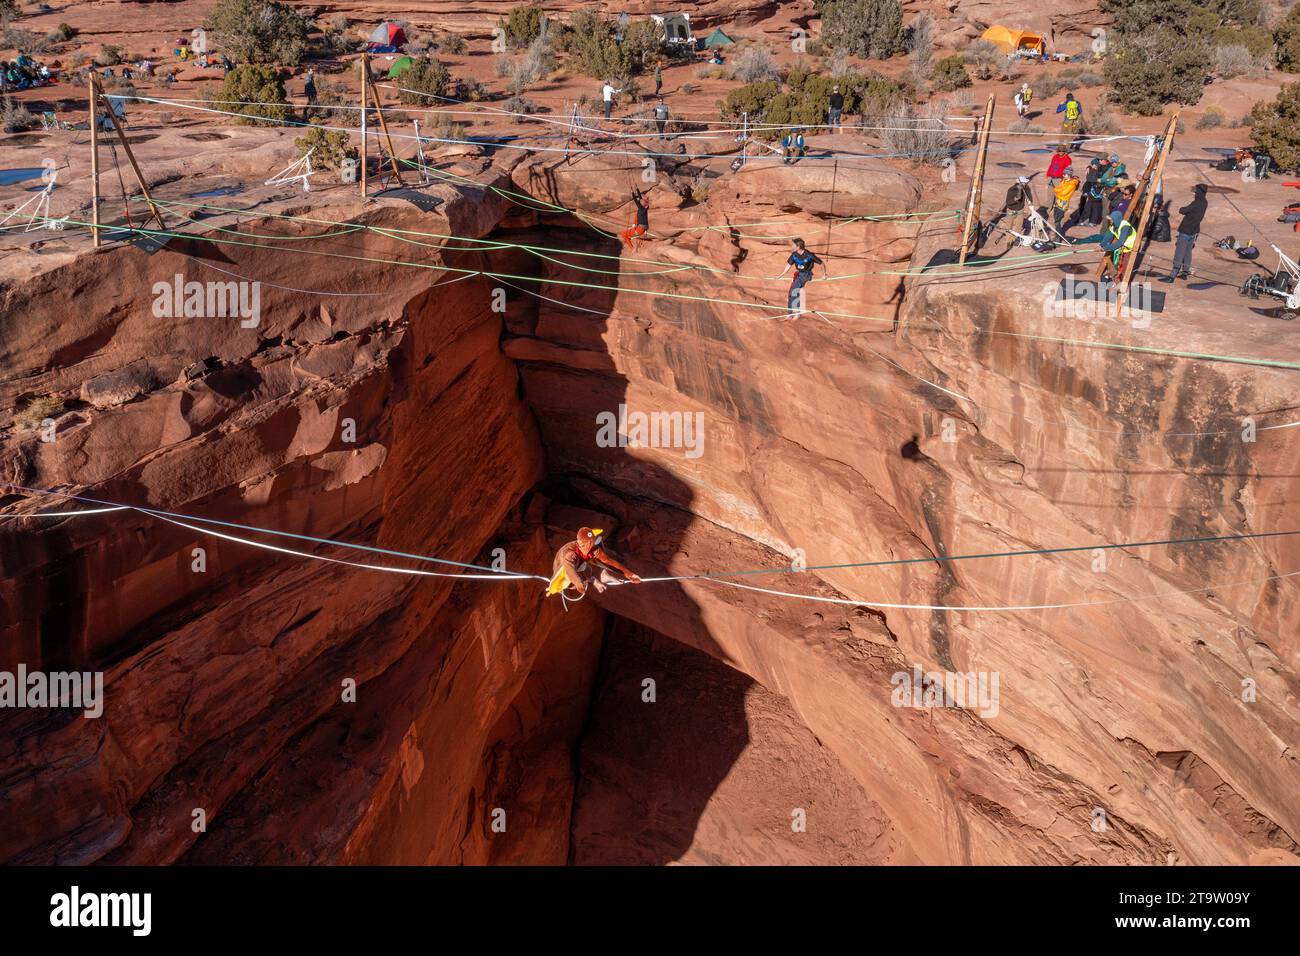 Aerial view of a person in a turkey costume highlining 500 feet above the canyon floor at the GGBY Highline Festival near Moab, Utah. Stock Photo